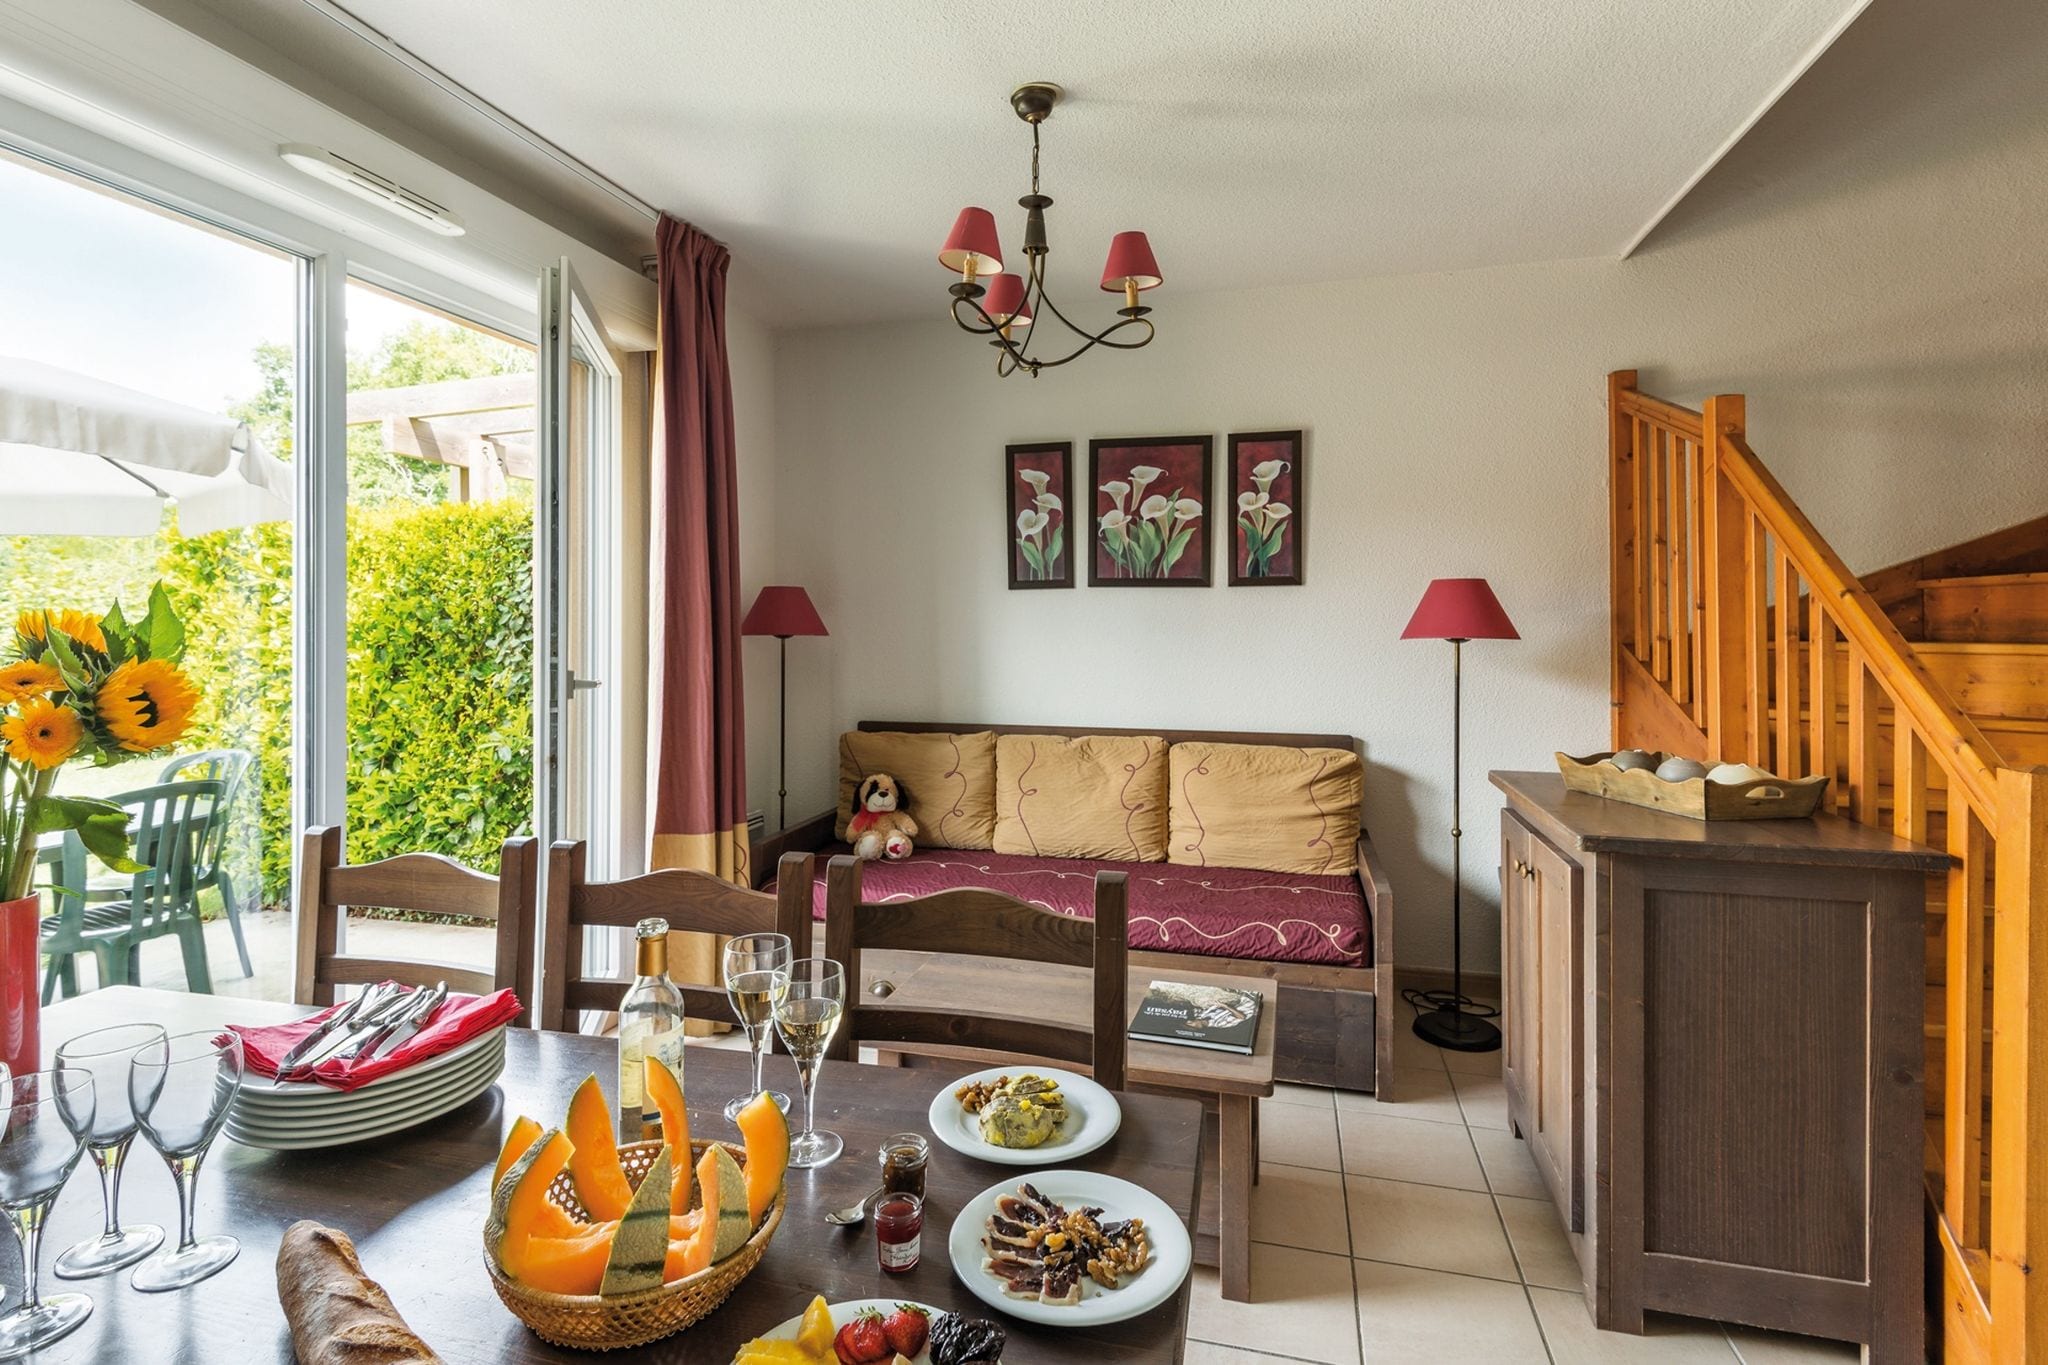 Beautiful apartment in a picturesque city in the Dordogne